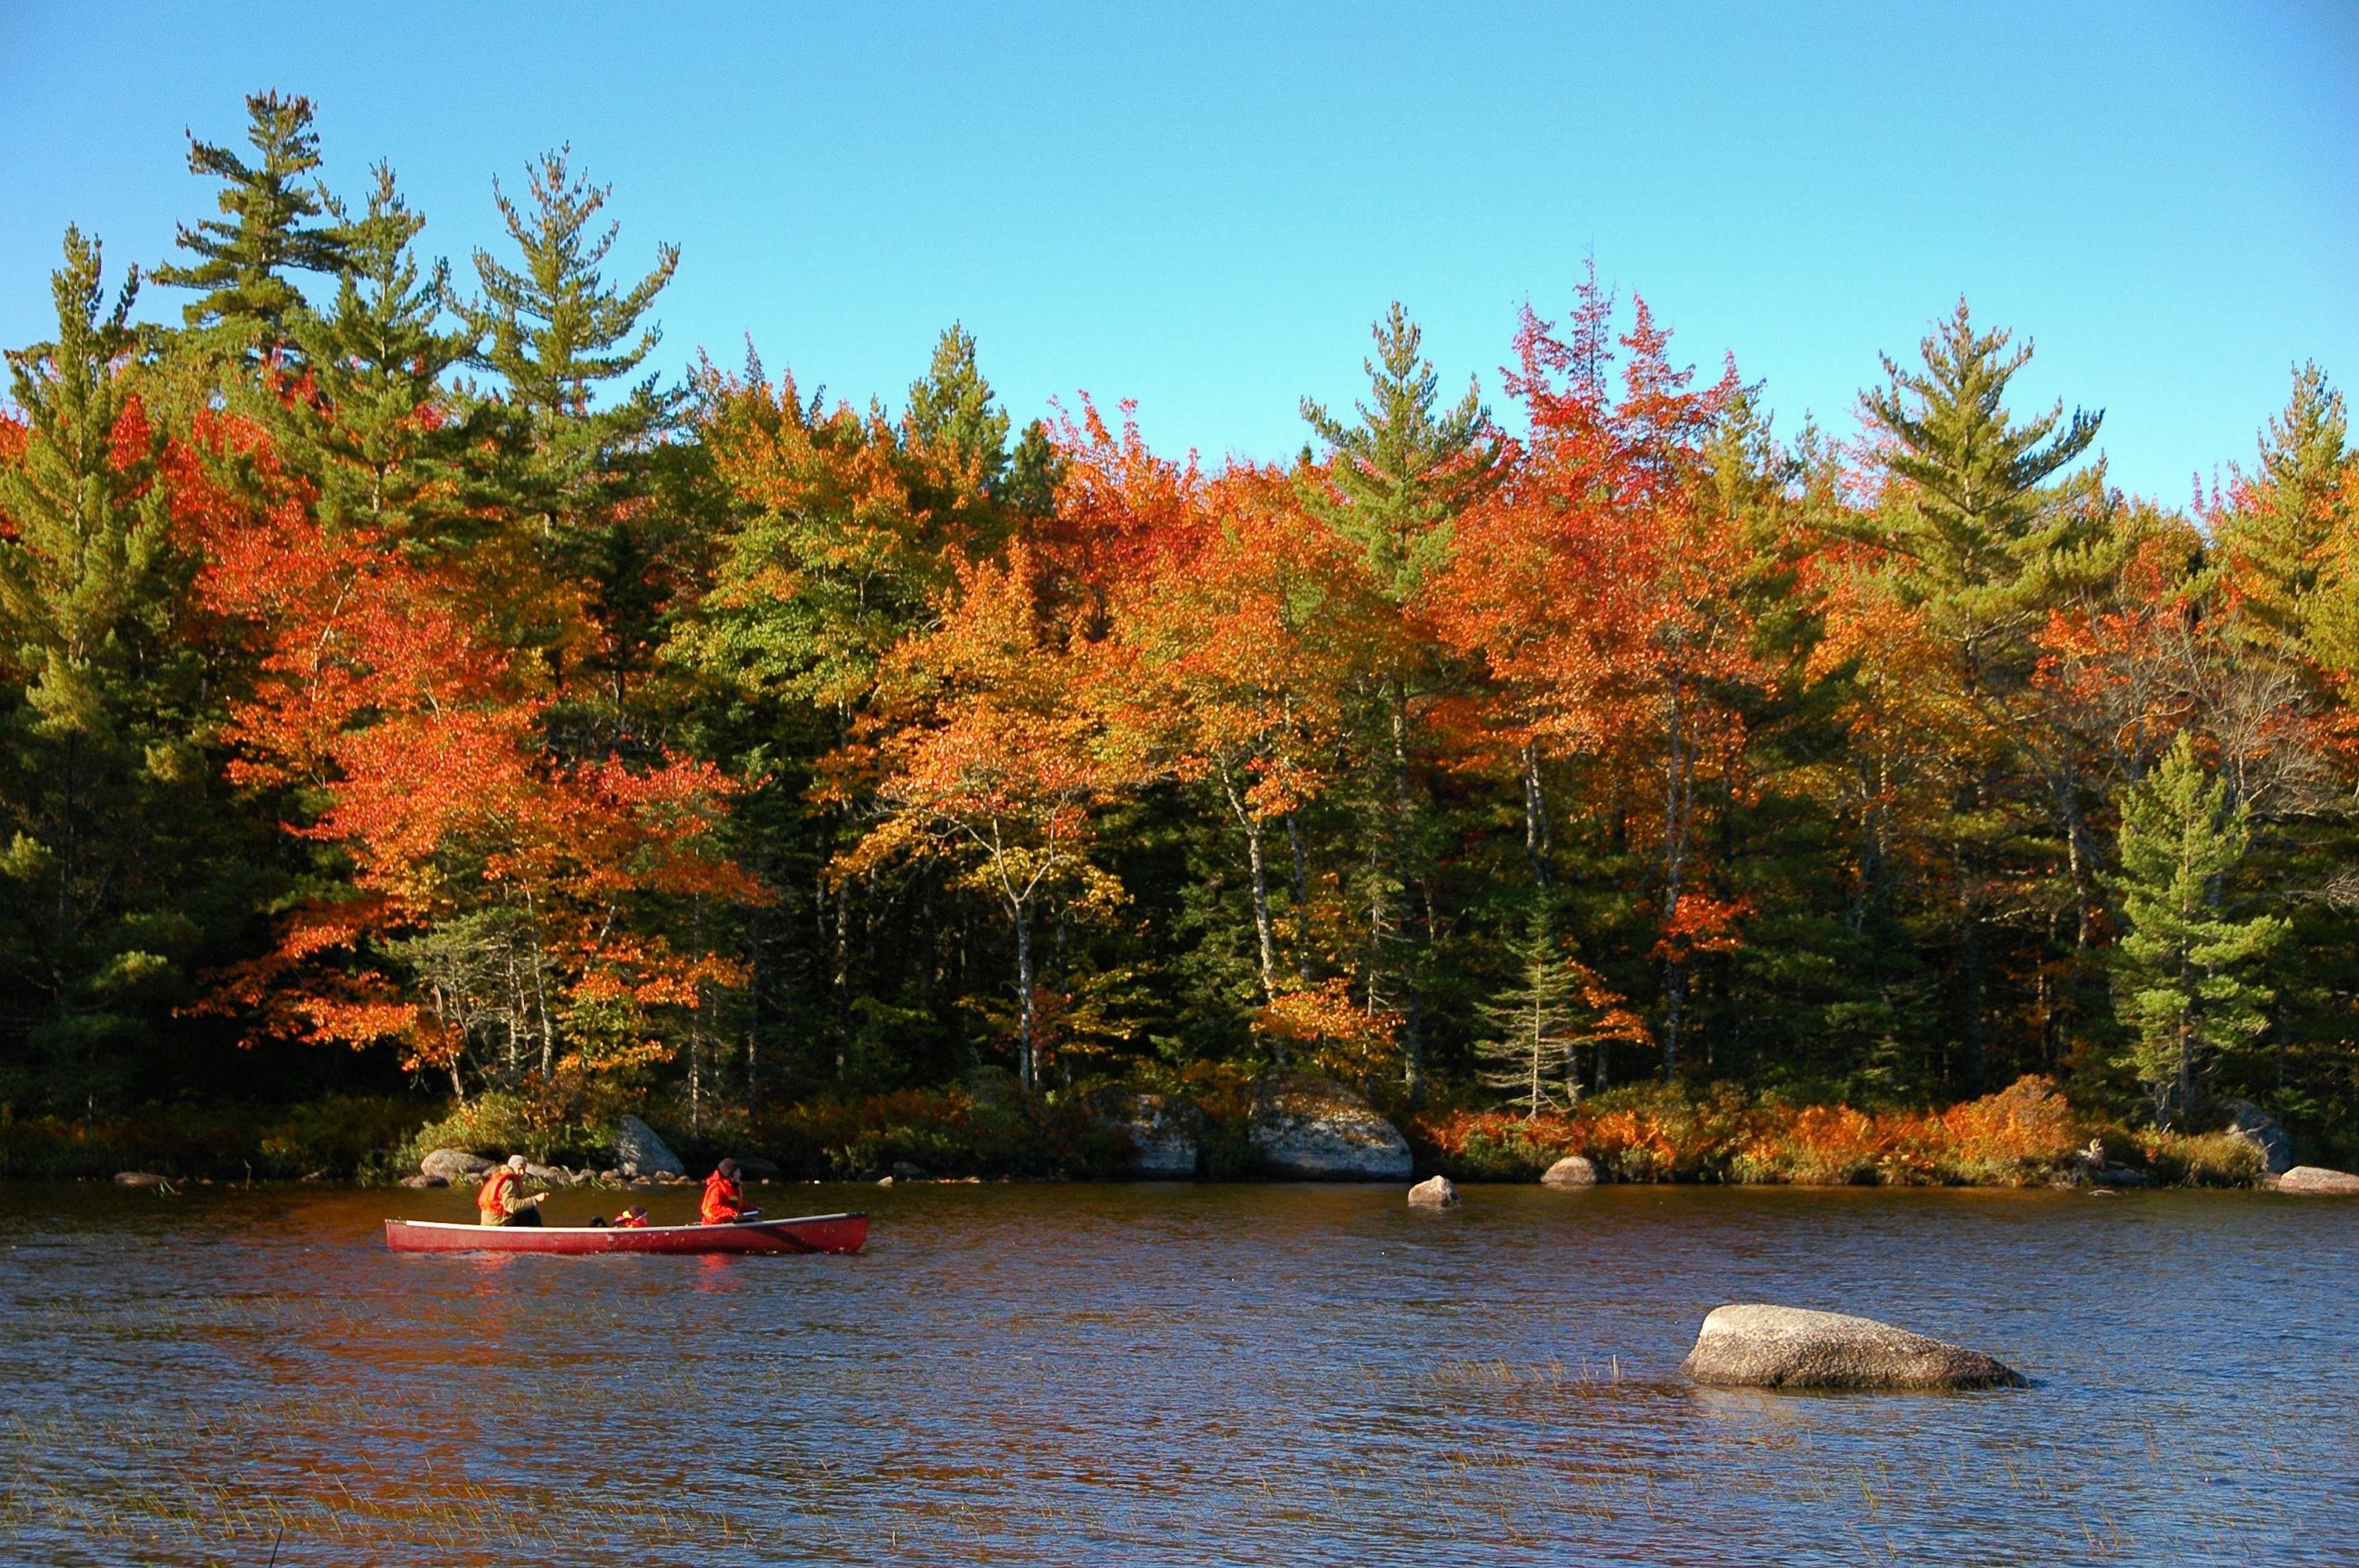 Canoes enjoying the fall scenery of Kejimkujik National Park. Established in 1967 Kejimkujik National Park is located in Southwestern Nova Scotia, Canada. With its many lakes and beautiful natural scenery, it popular with canoeing and backcountry camping.